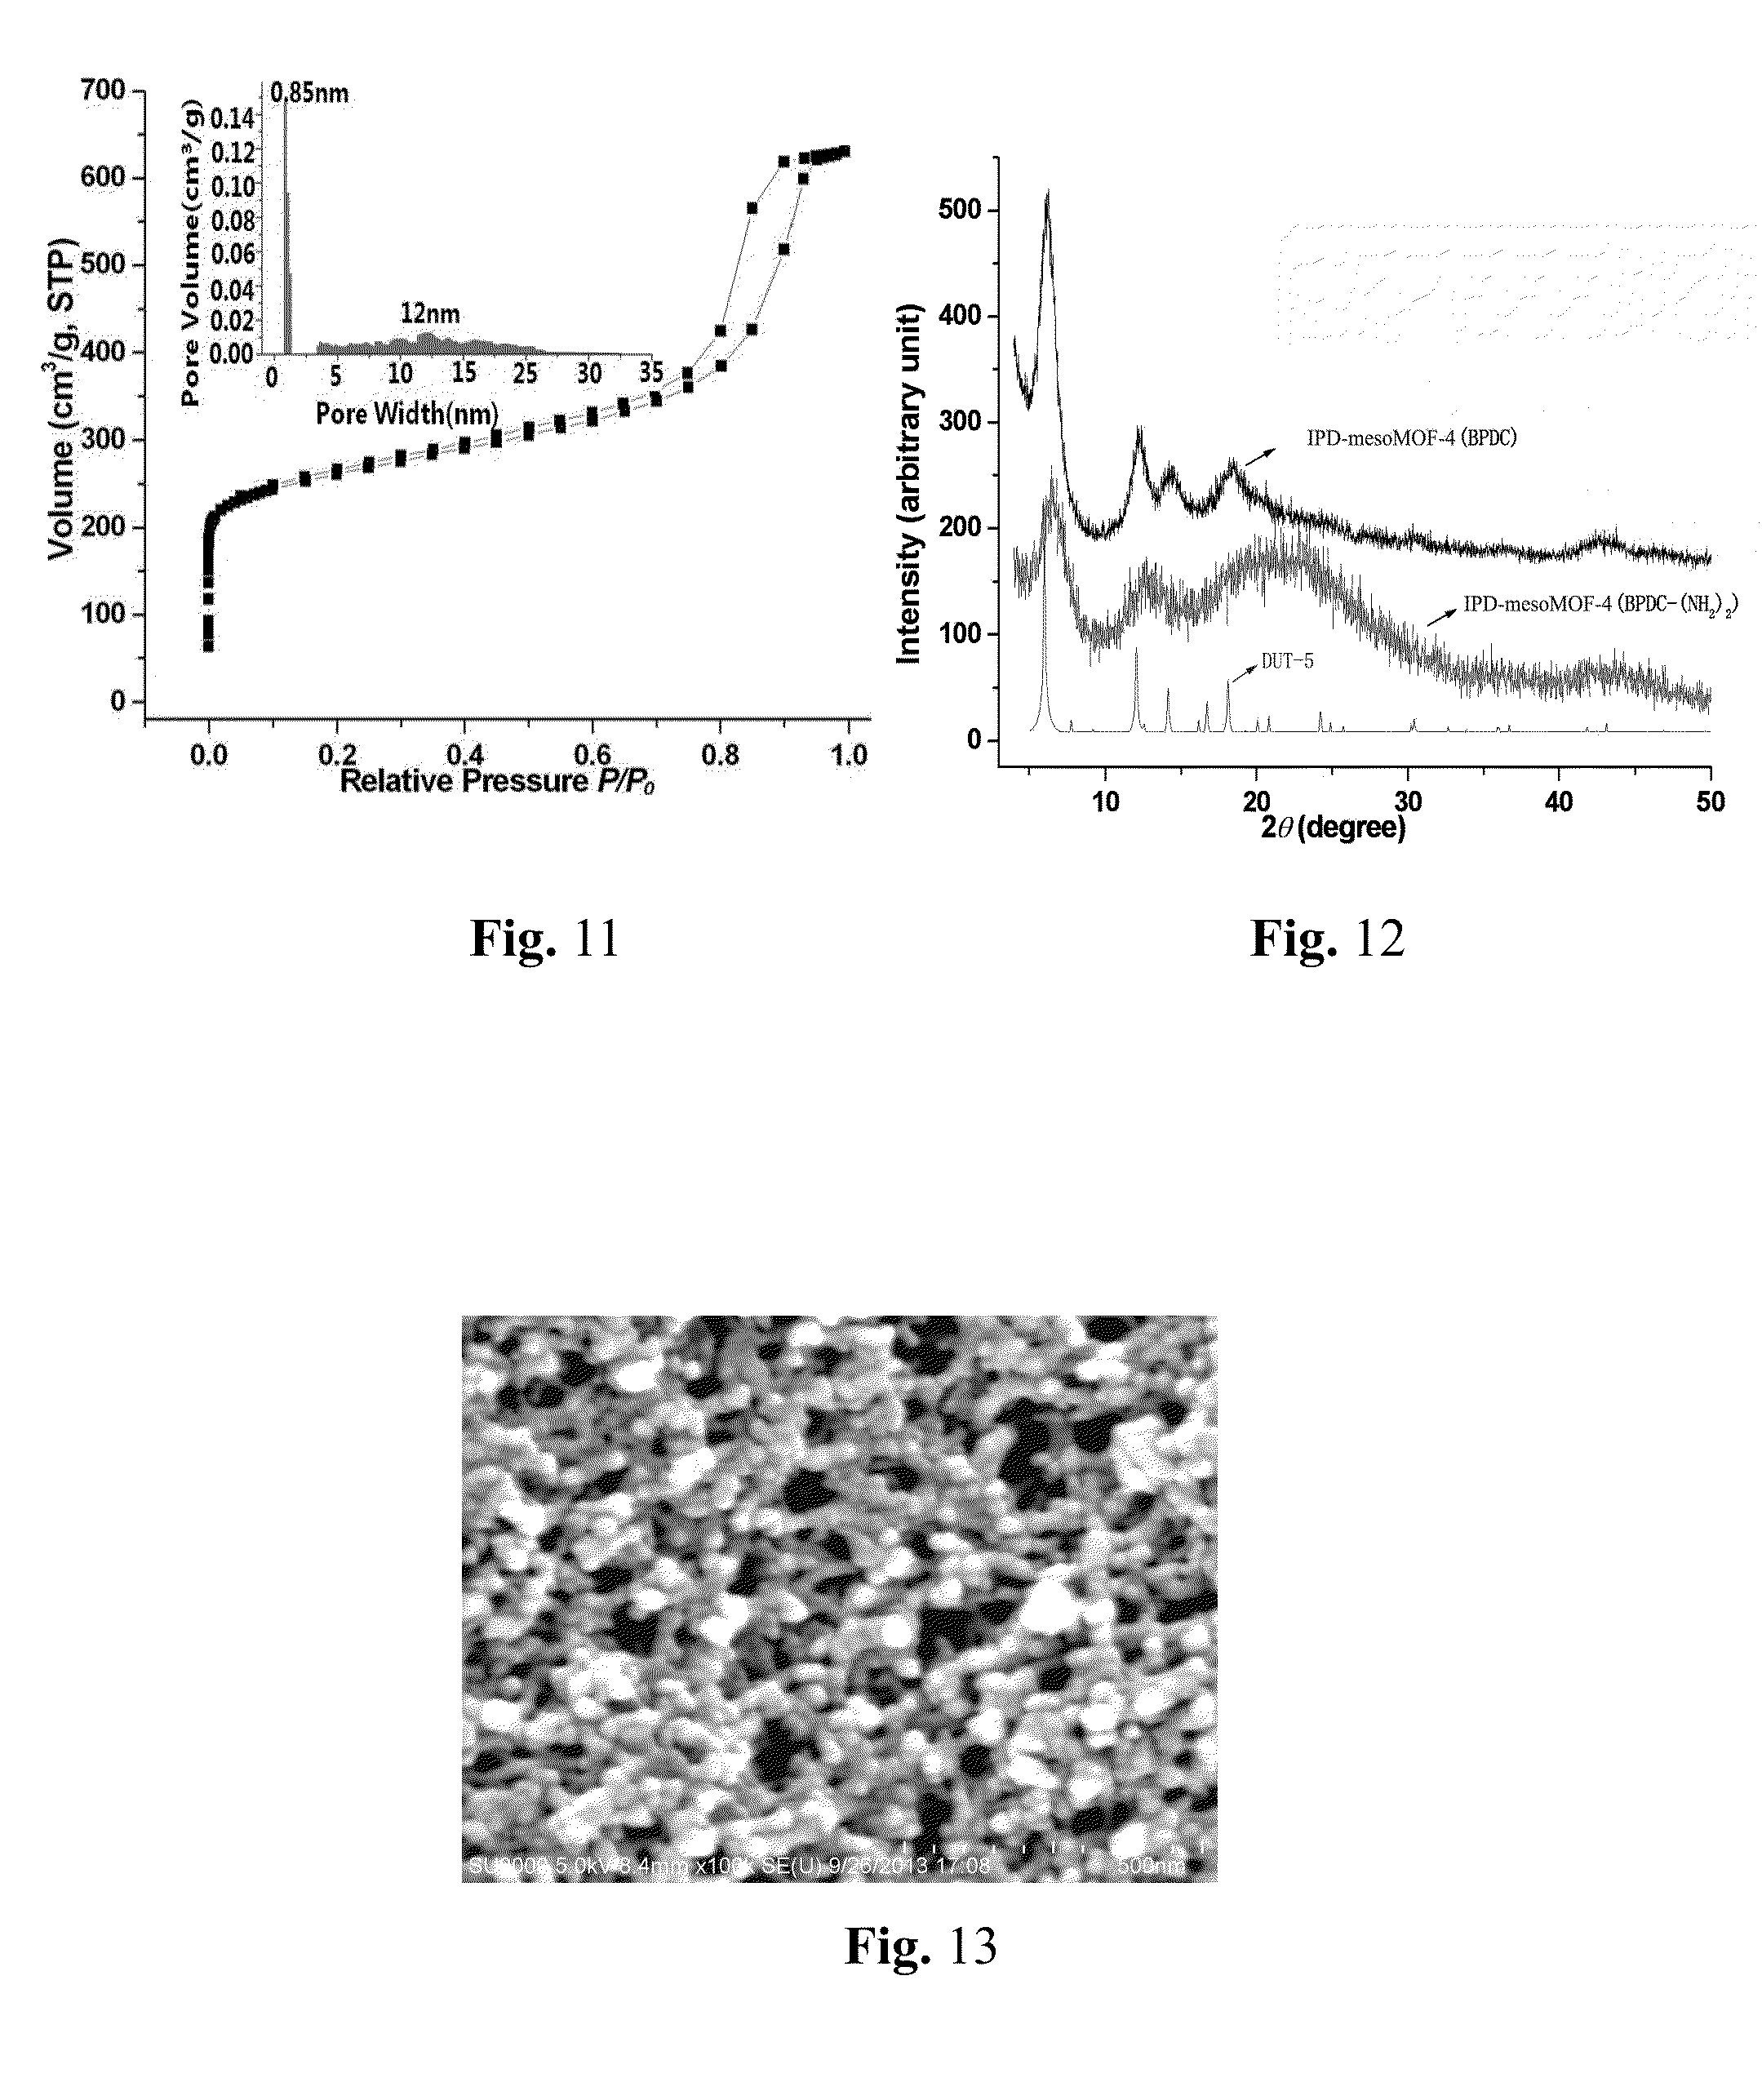 MOF-based hierarchical porous materials, methods for preparation, methods for pore regulation and uses thereof